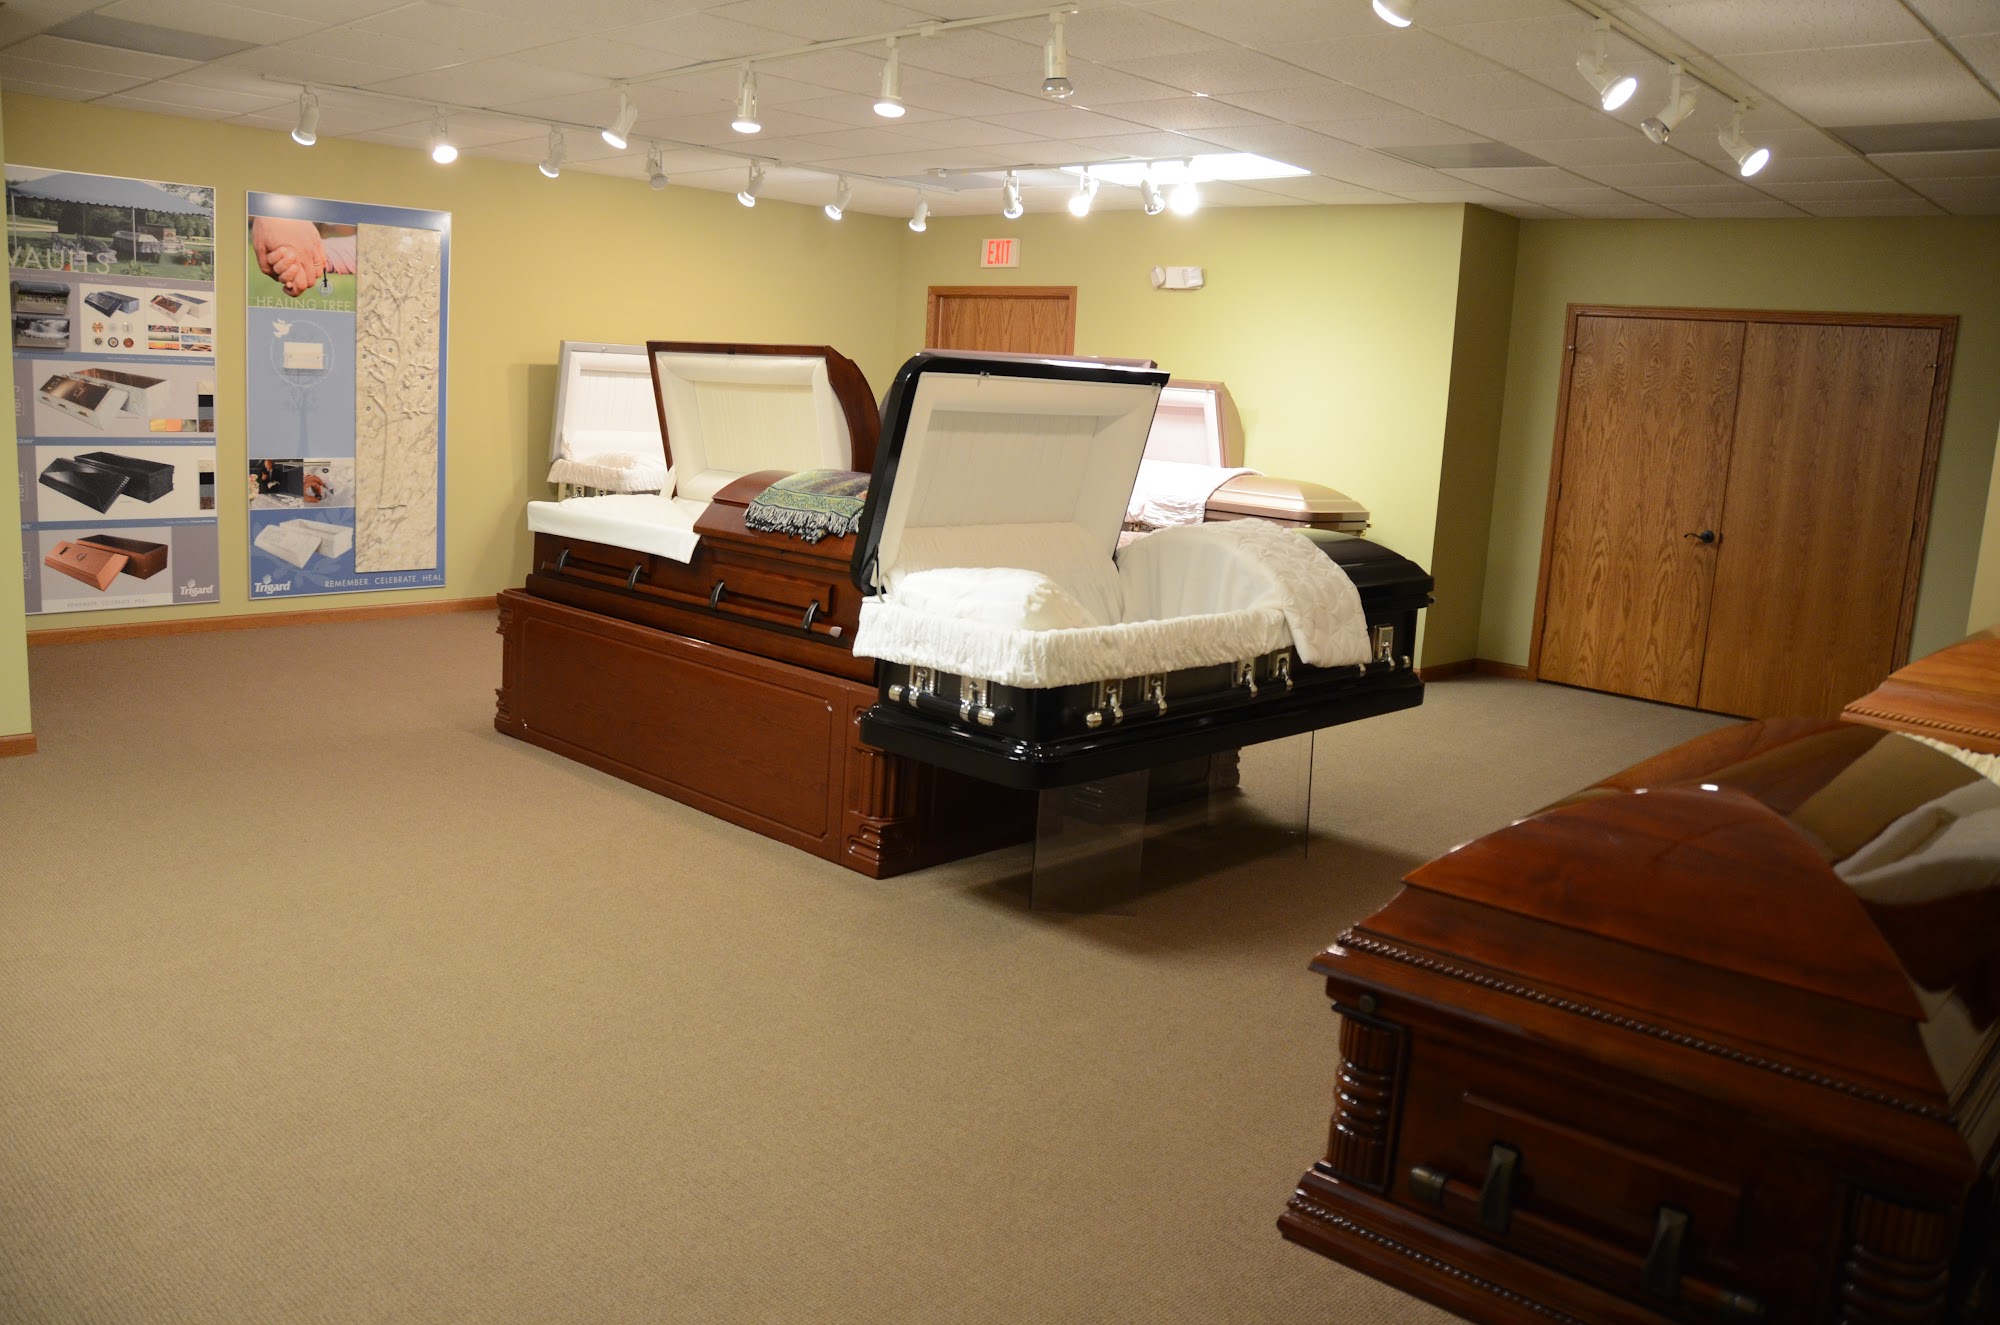 Sunset Funeral Home & Cremation Center 420 3rd St, Covington Indiana 47932